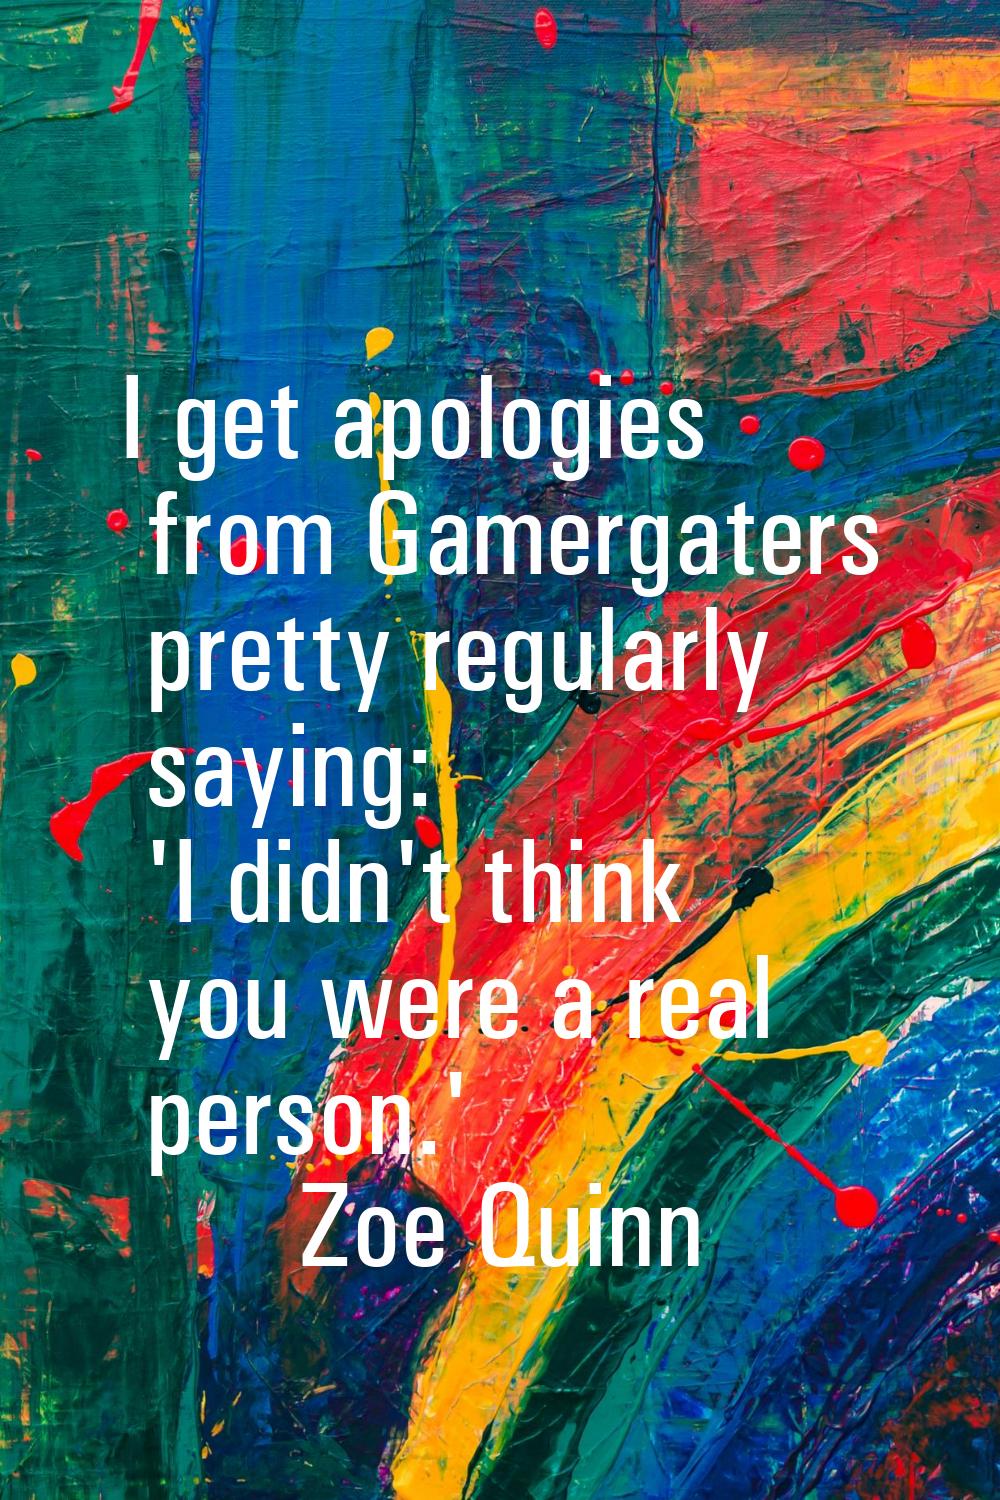 I get apologies from Gamergaters pretty regularly saying: 'I didn't think you were a real person.'